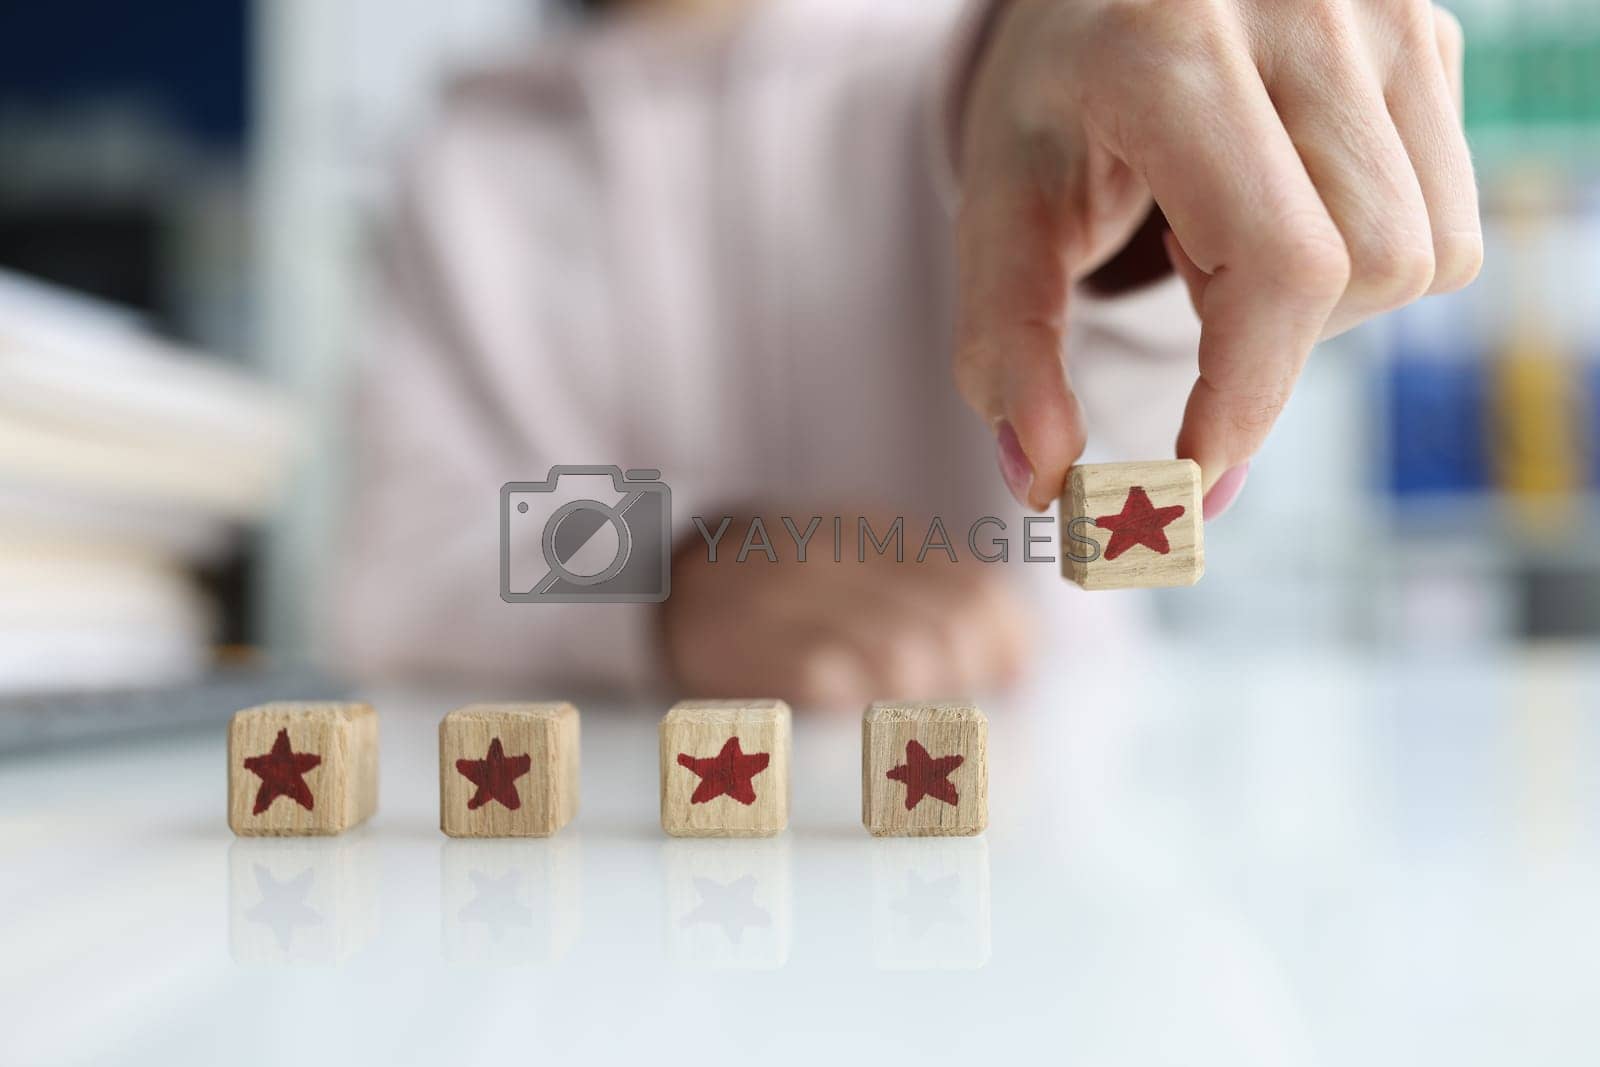 Royalty free image of Five stars reviews review and rating concept by kuprevich